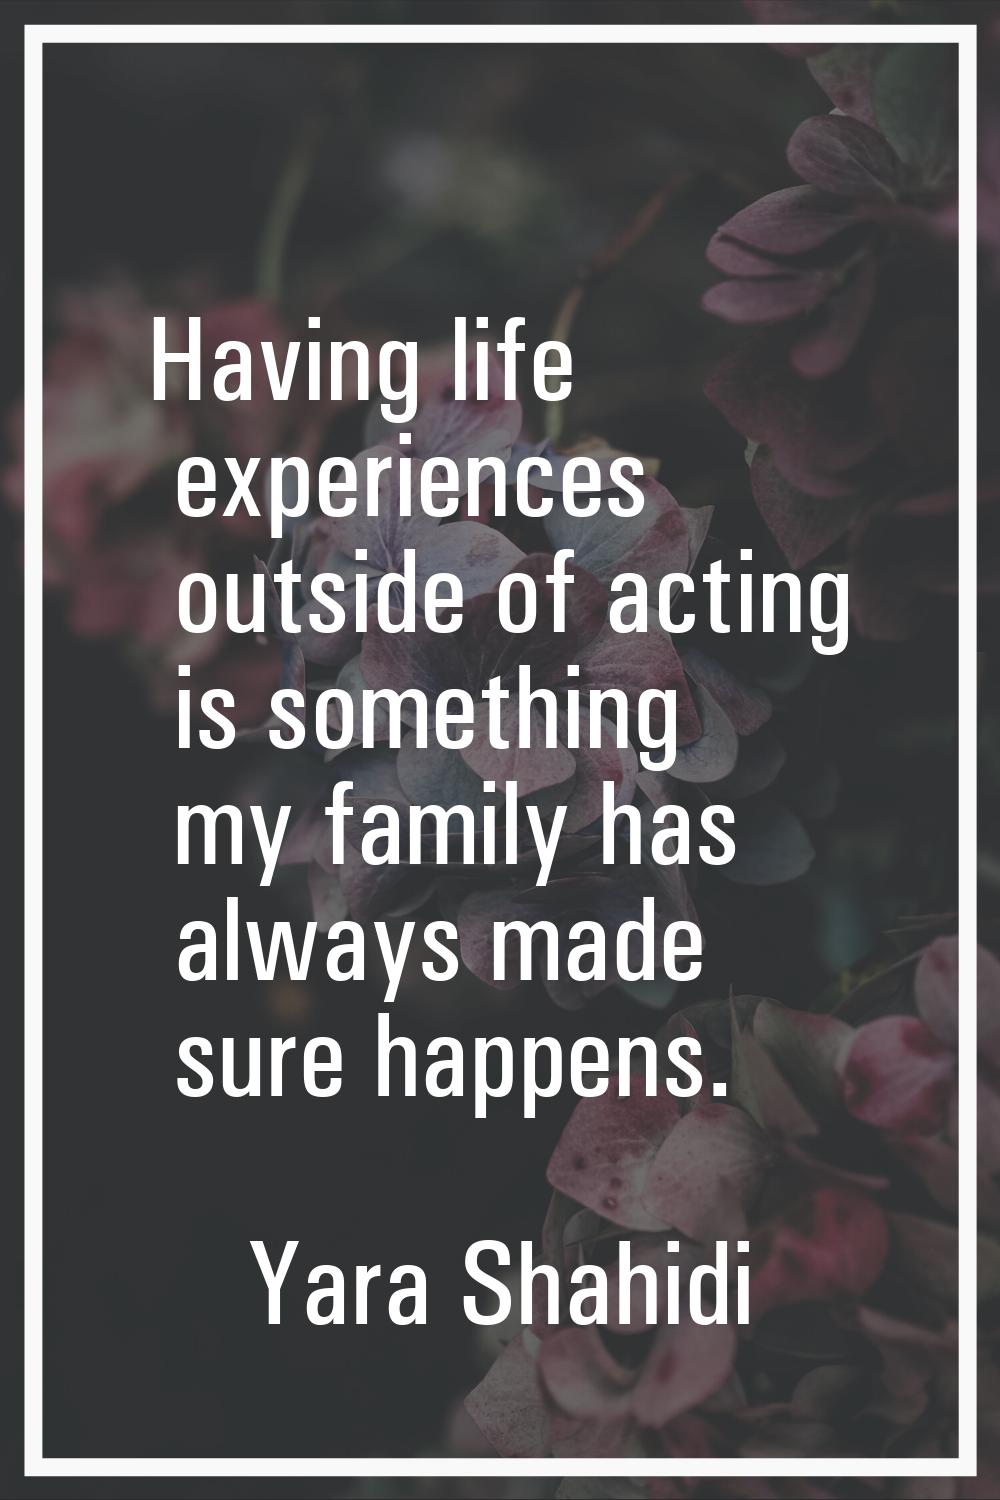 Having life experiences outside of acting is something my family has always made sure happens.